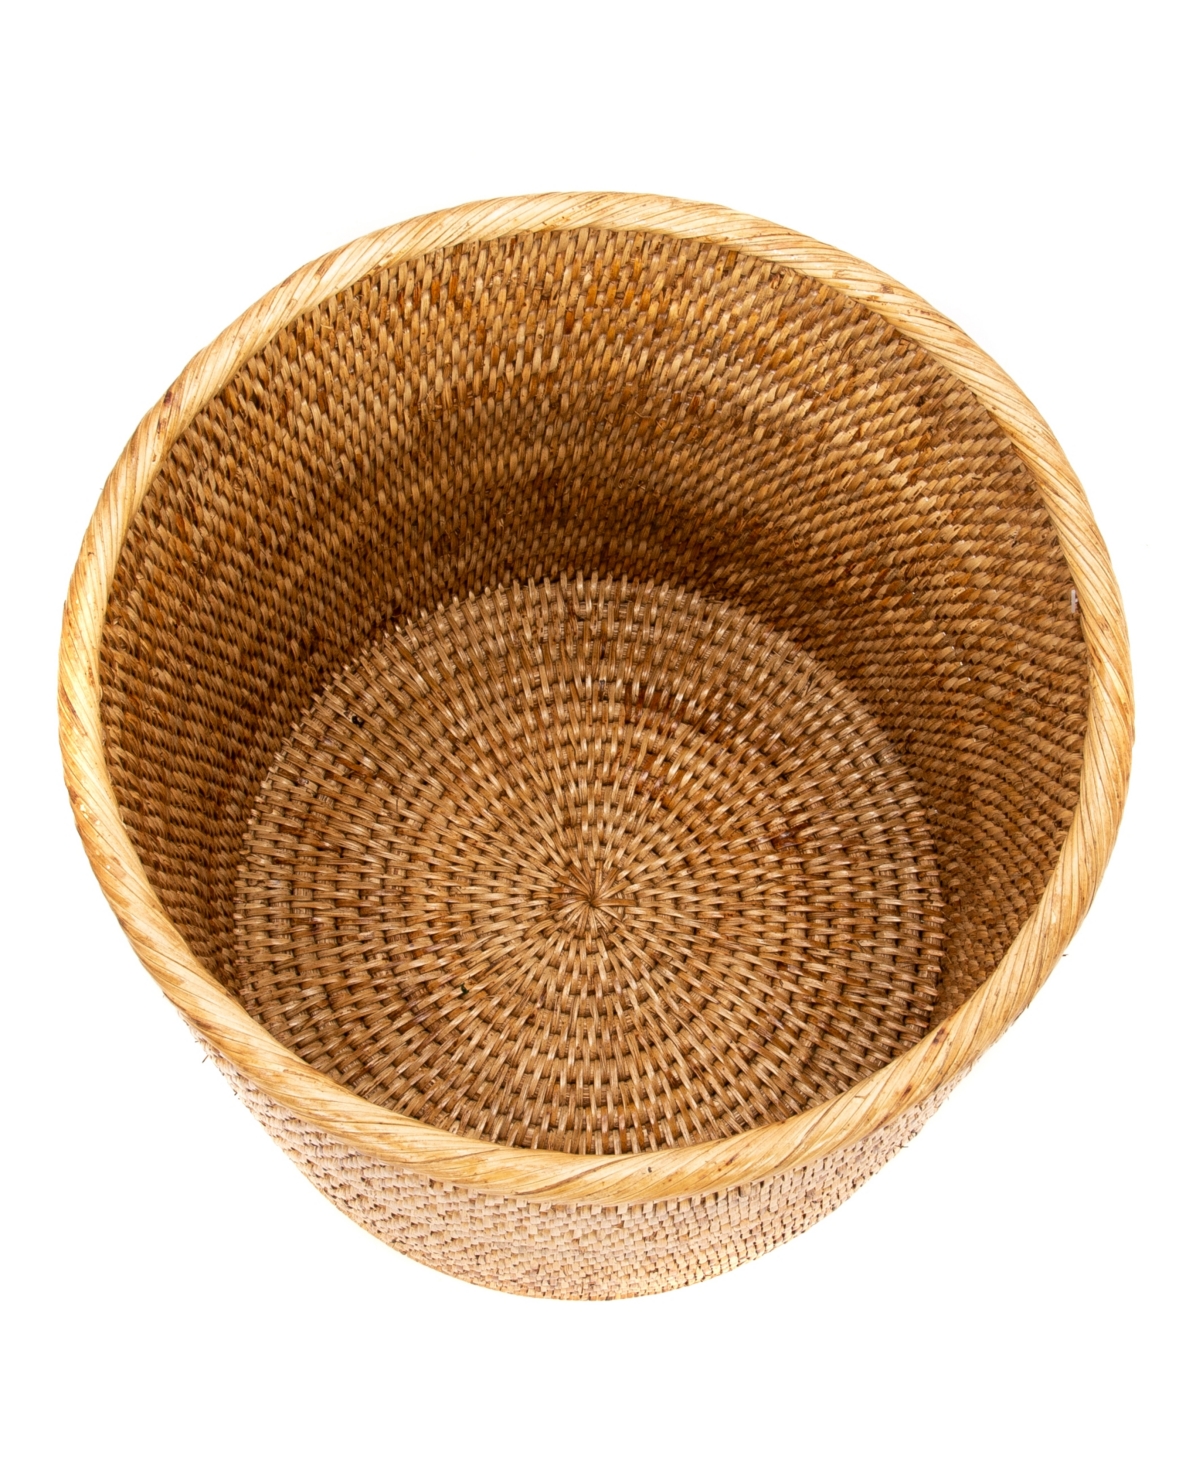 Shop Artifacts Trading Company Artifacts Rattan Round Waste Basket In Honey Brown